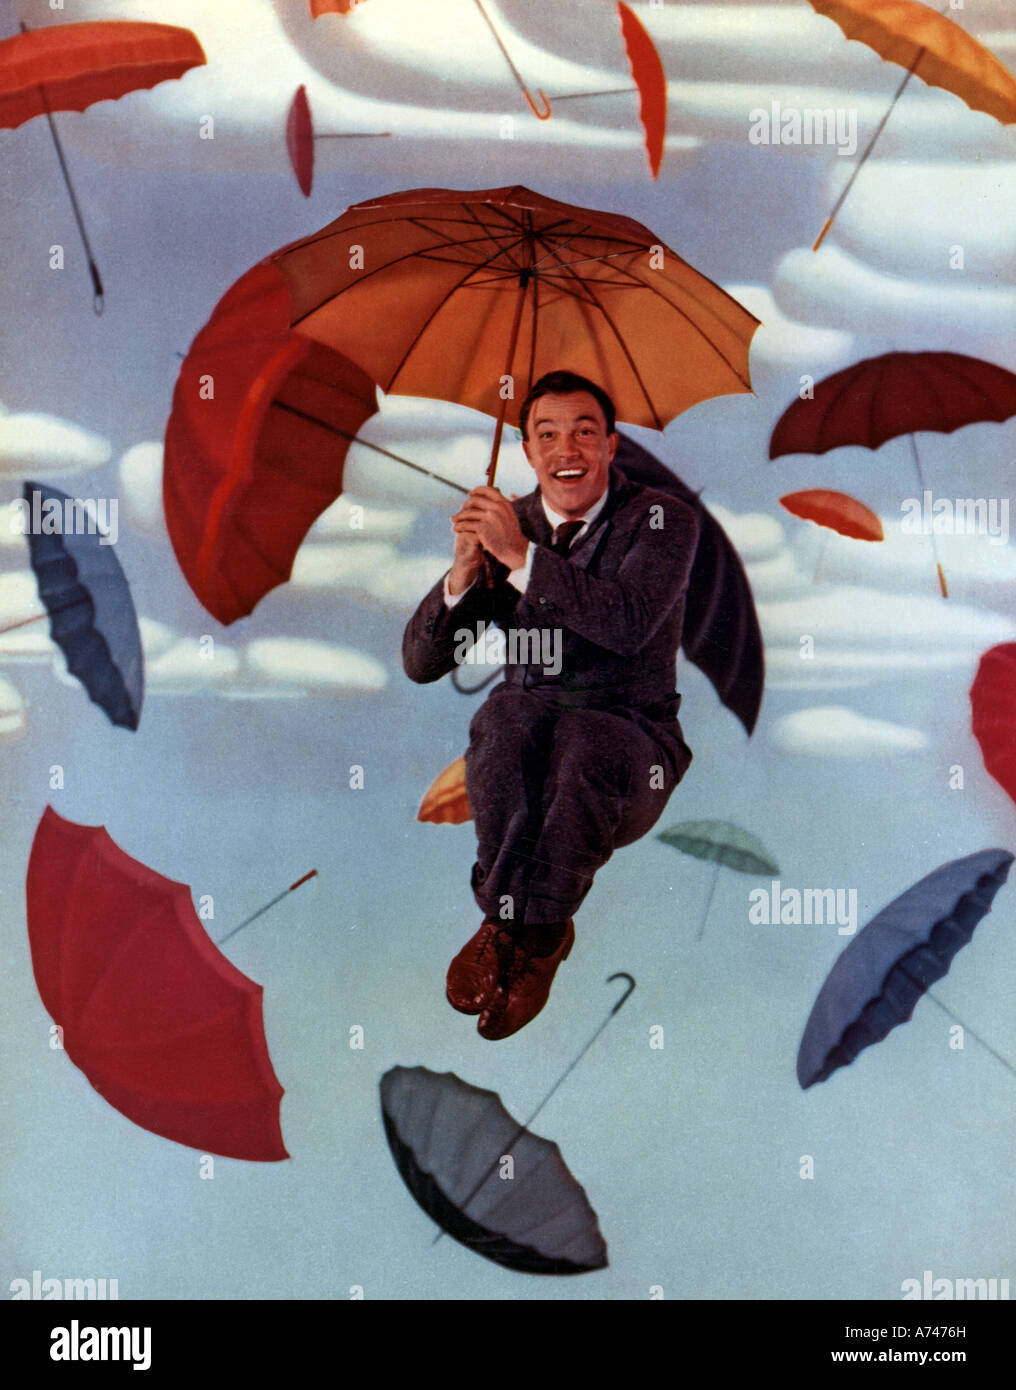 SINGIN' IN THE RAIN 1962 MGM film musical with Gene Kelly Stock Photo